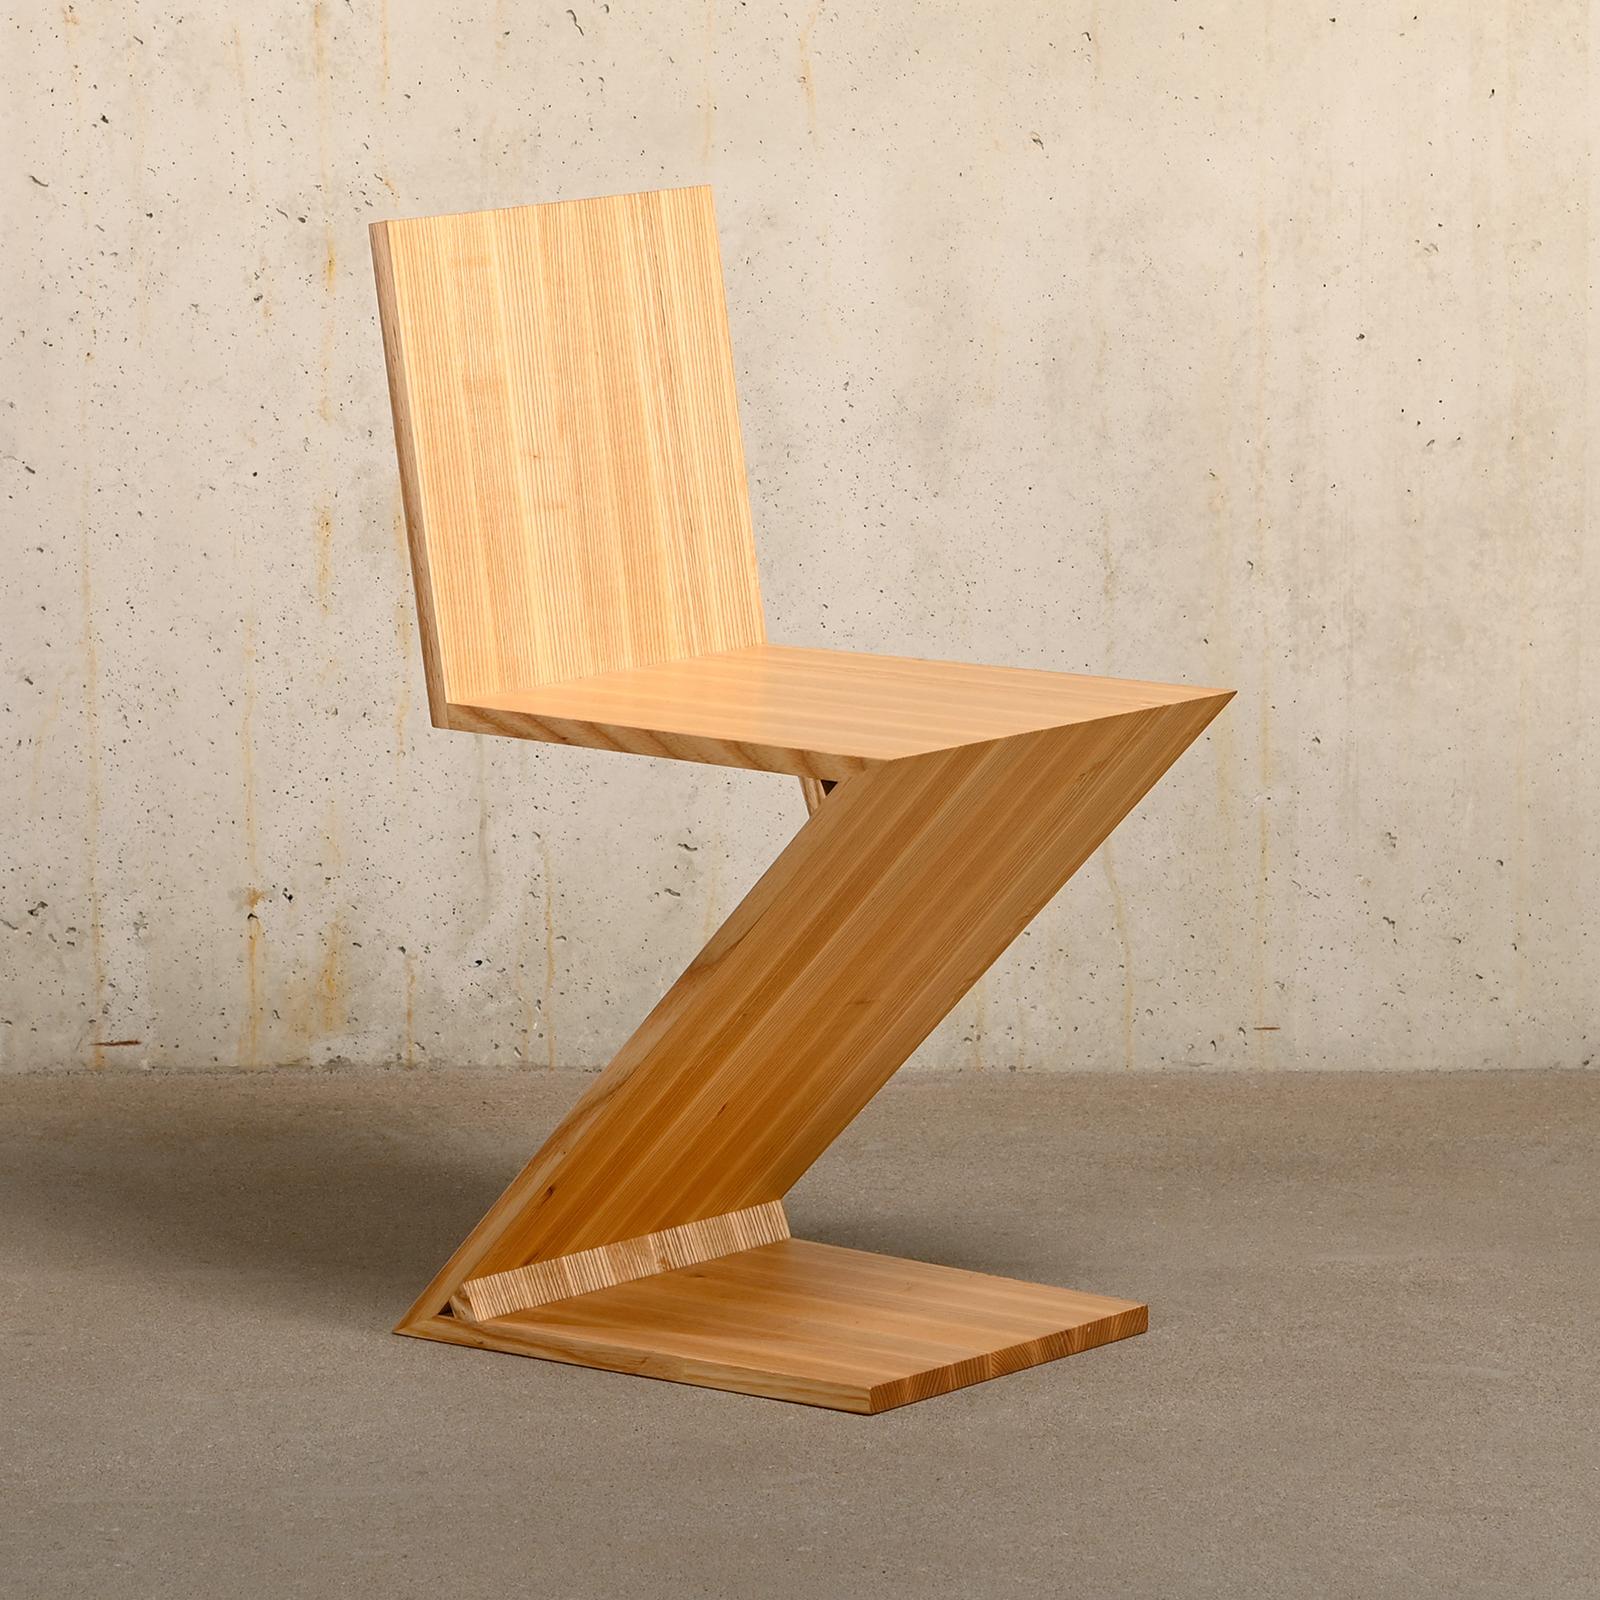 This Zig Zag Chair was manufactured by a local craftsman after the design of Gerrit Rietveld. Solid ash wood finished in matte lacquer in very good and sturdy condition.